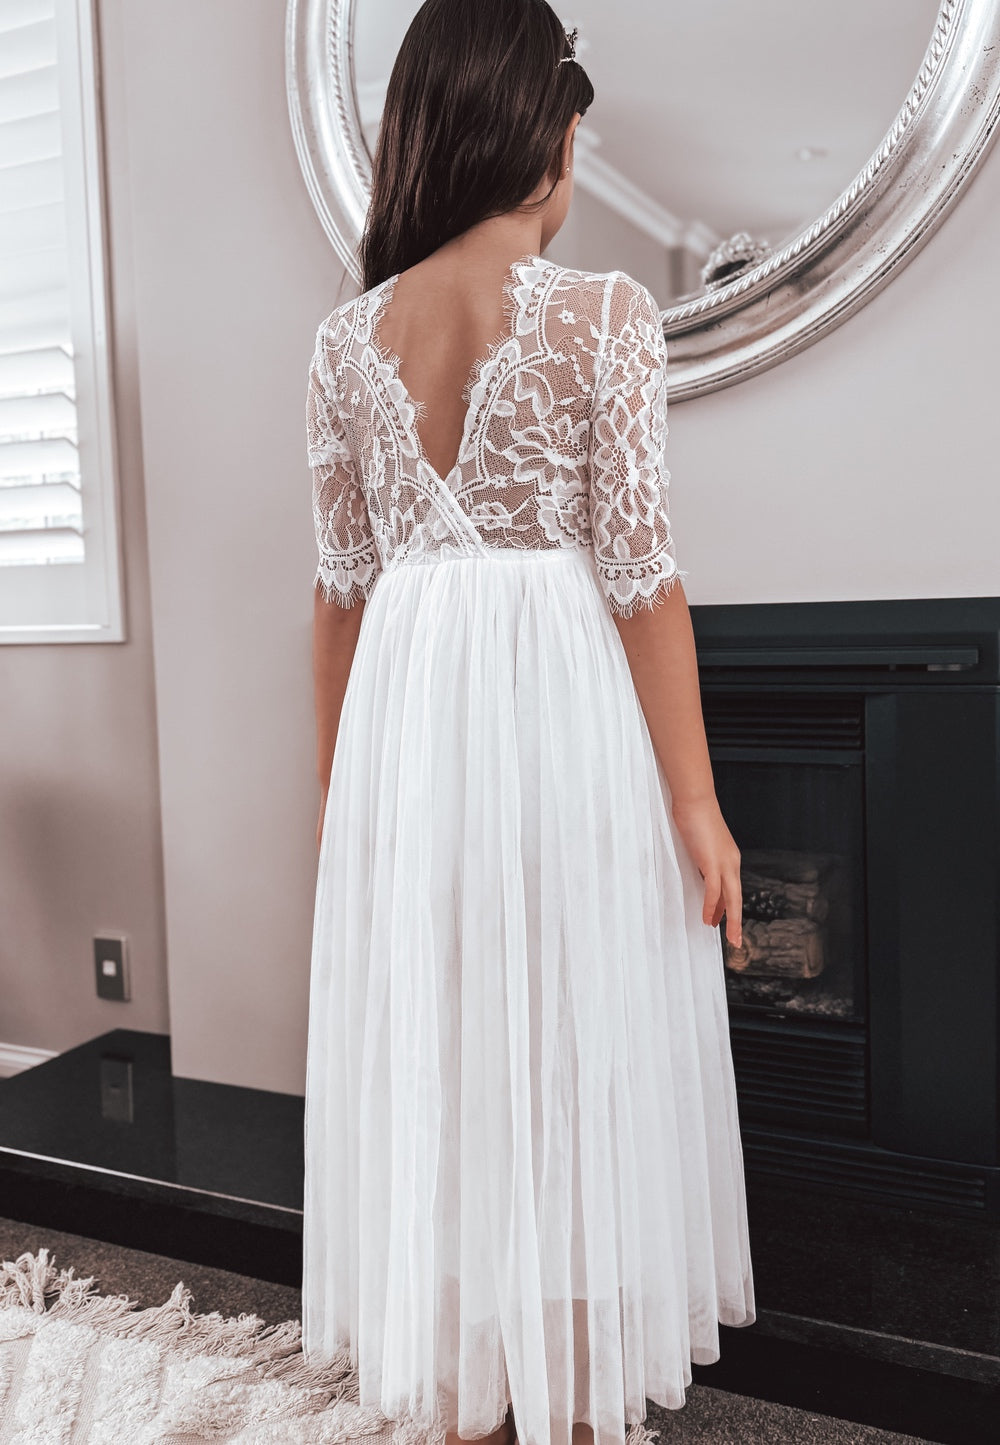 Maia White Lace Dress - All Products